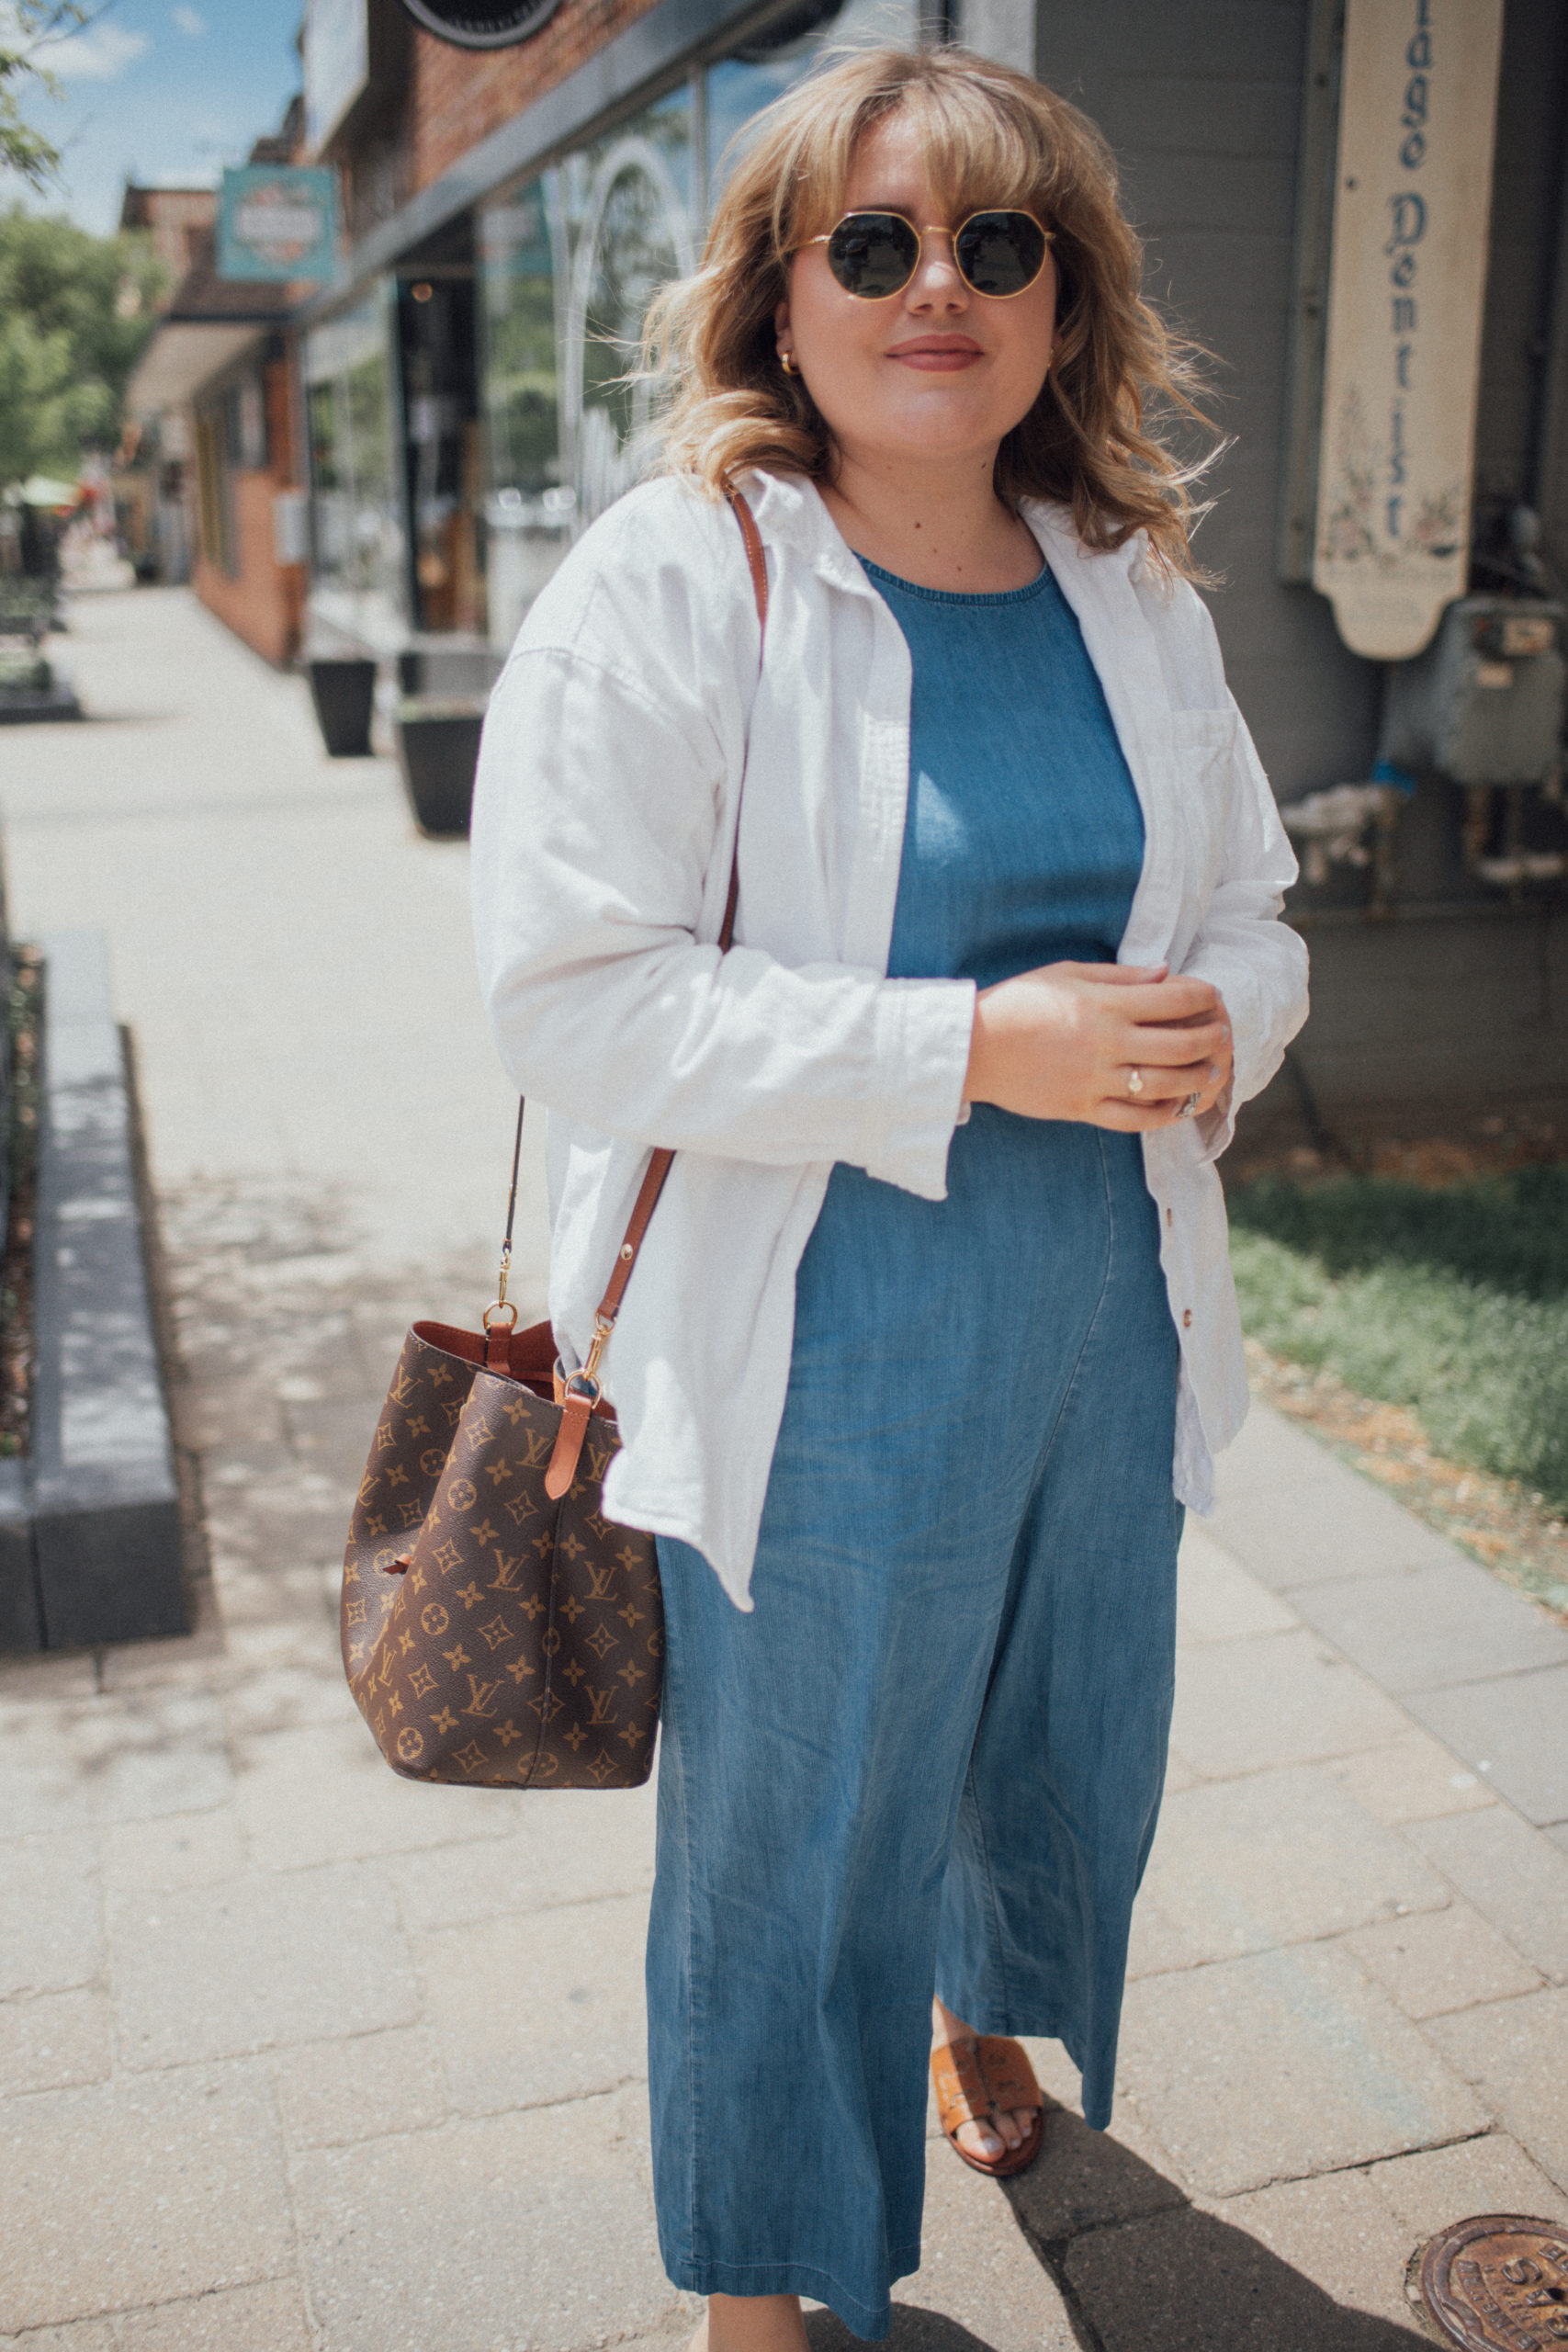 Sharing a plus size coastal grandmother style outfit. Coastal grandmother style is all things light layers, casual chic and comfortable! 